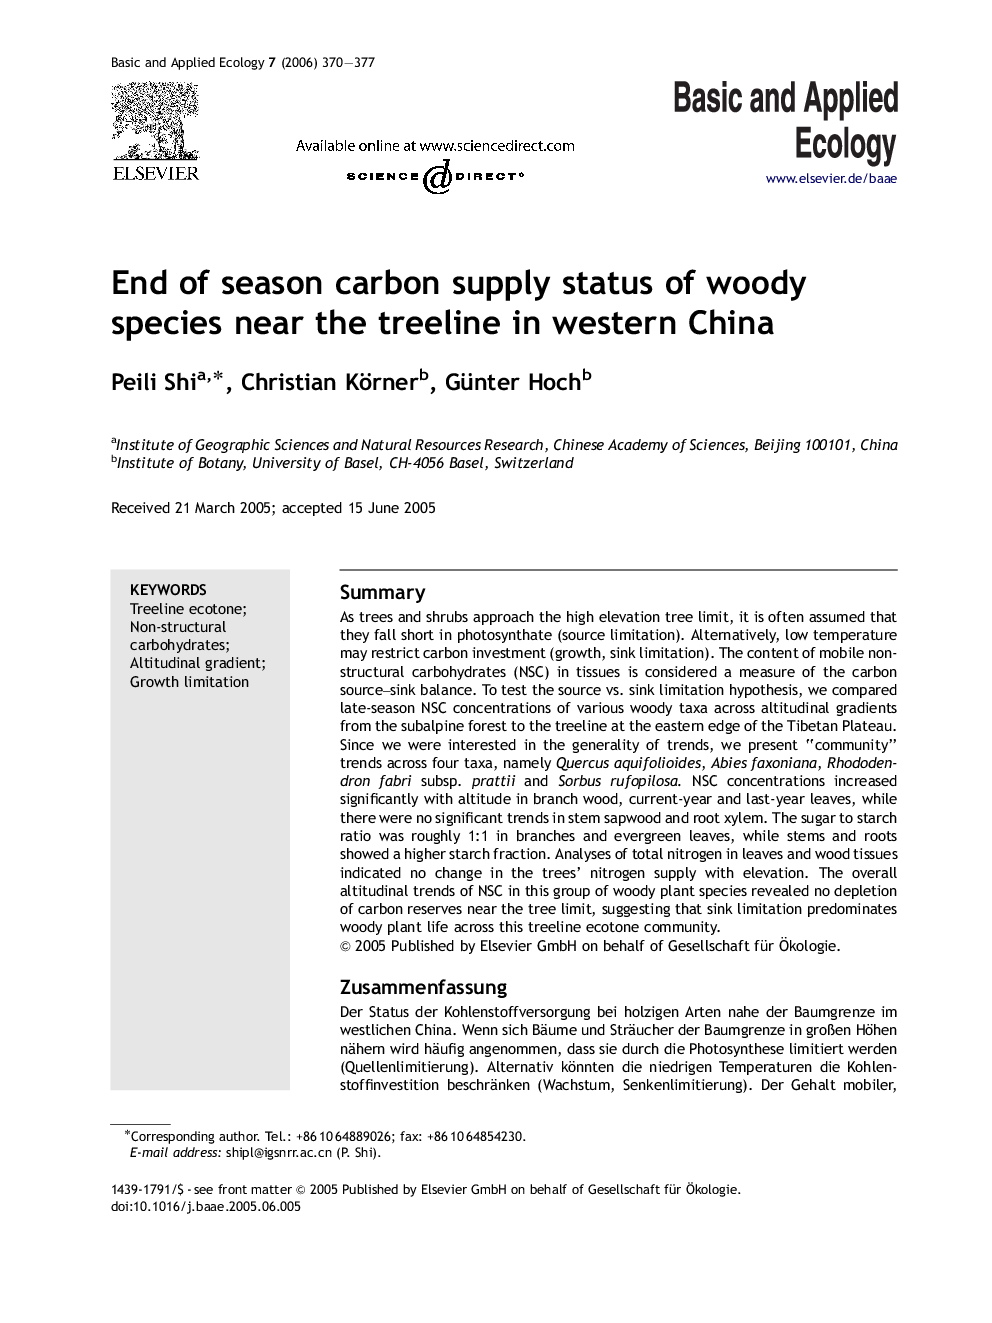 End of season carbon supply status of woody species near the treeline in western China